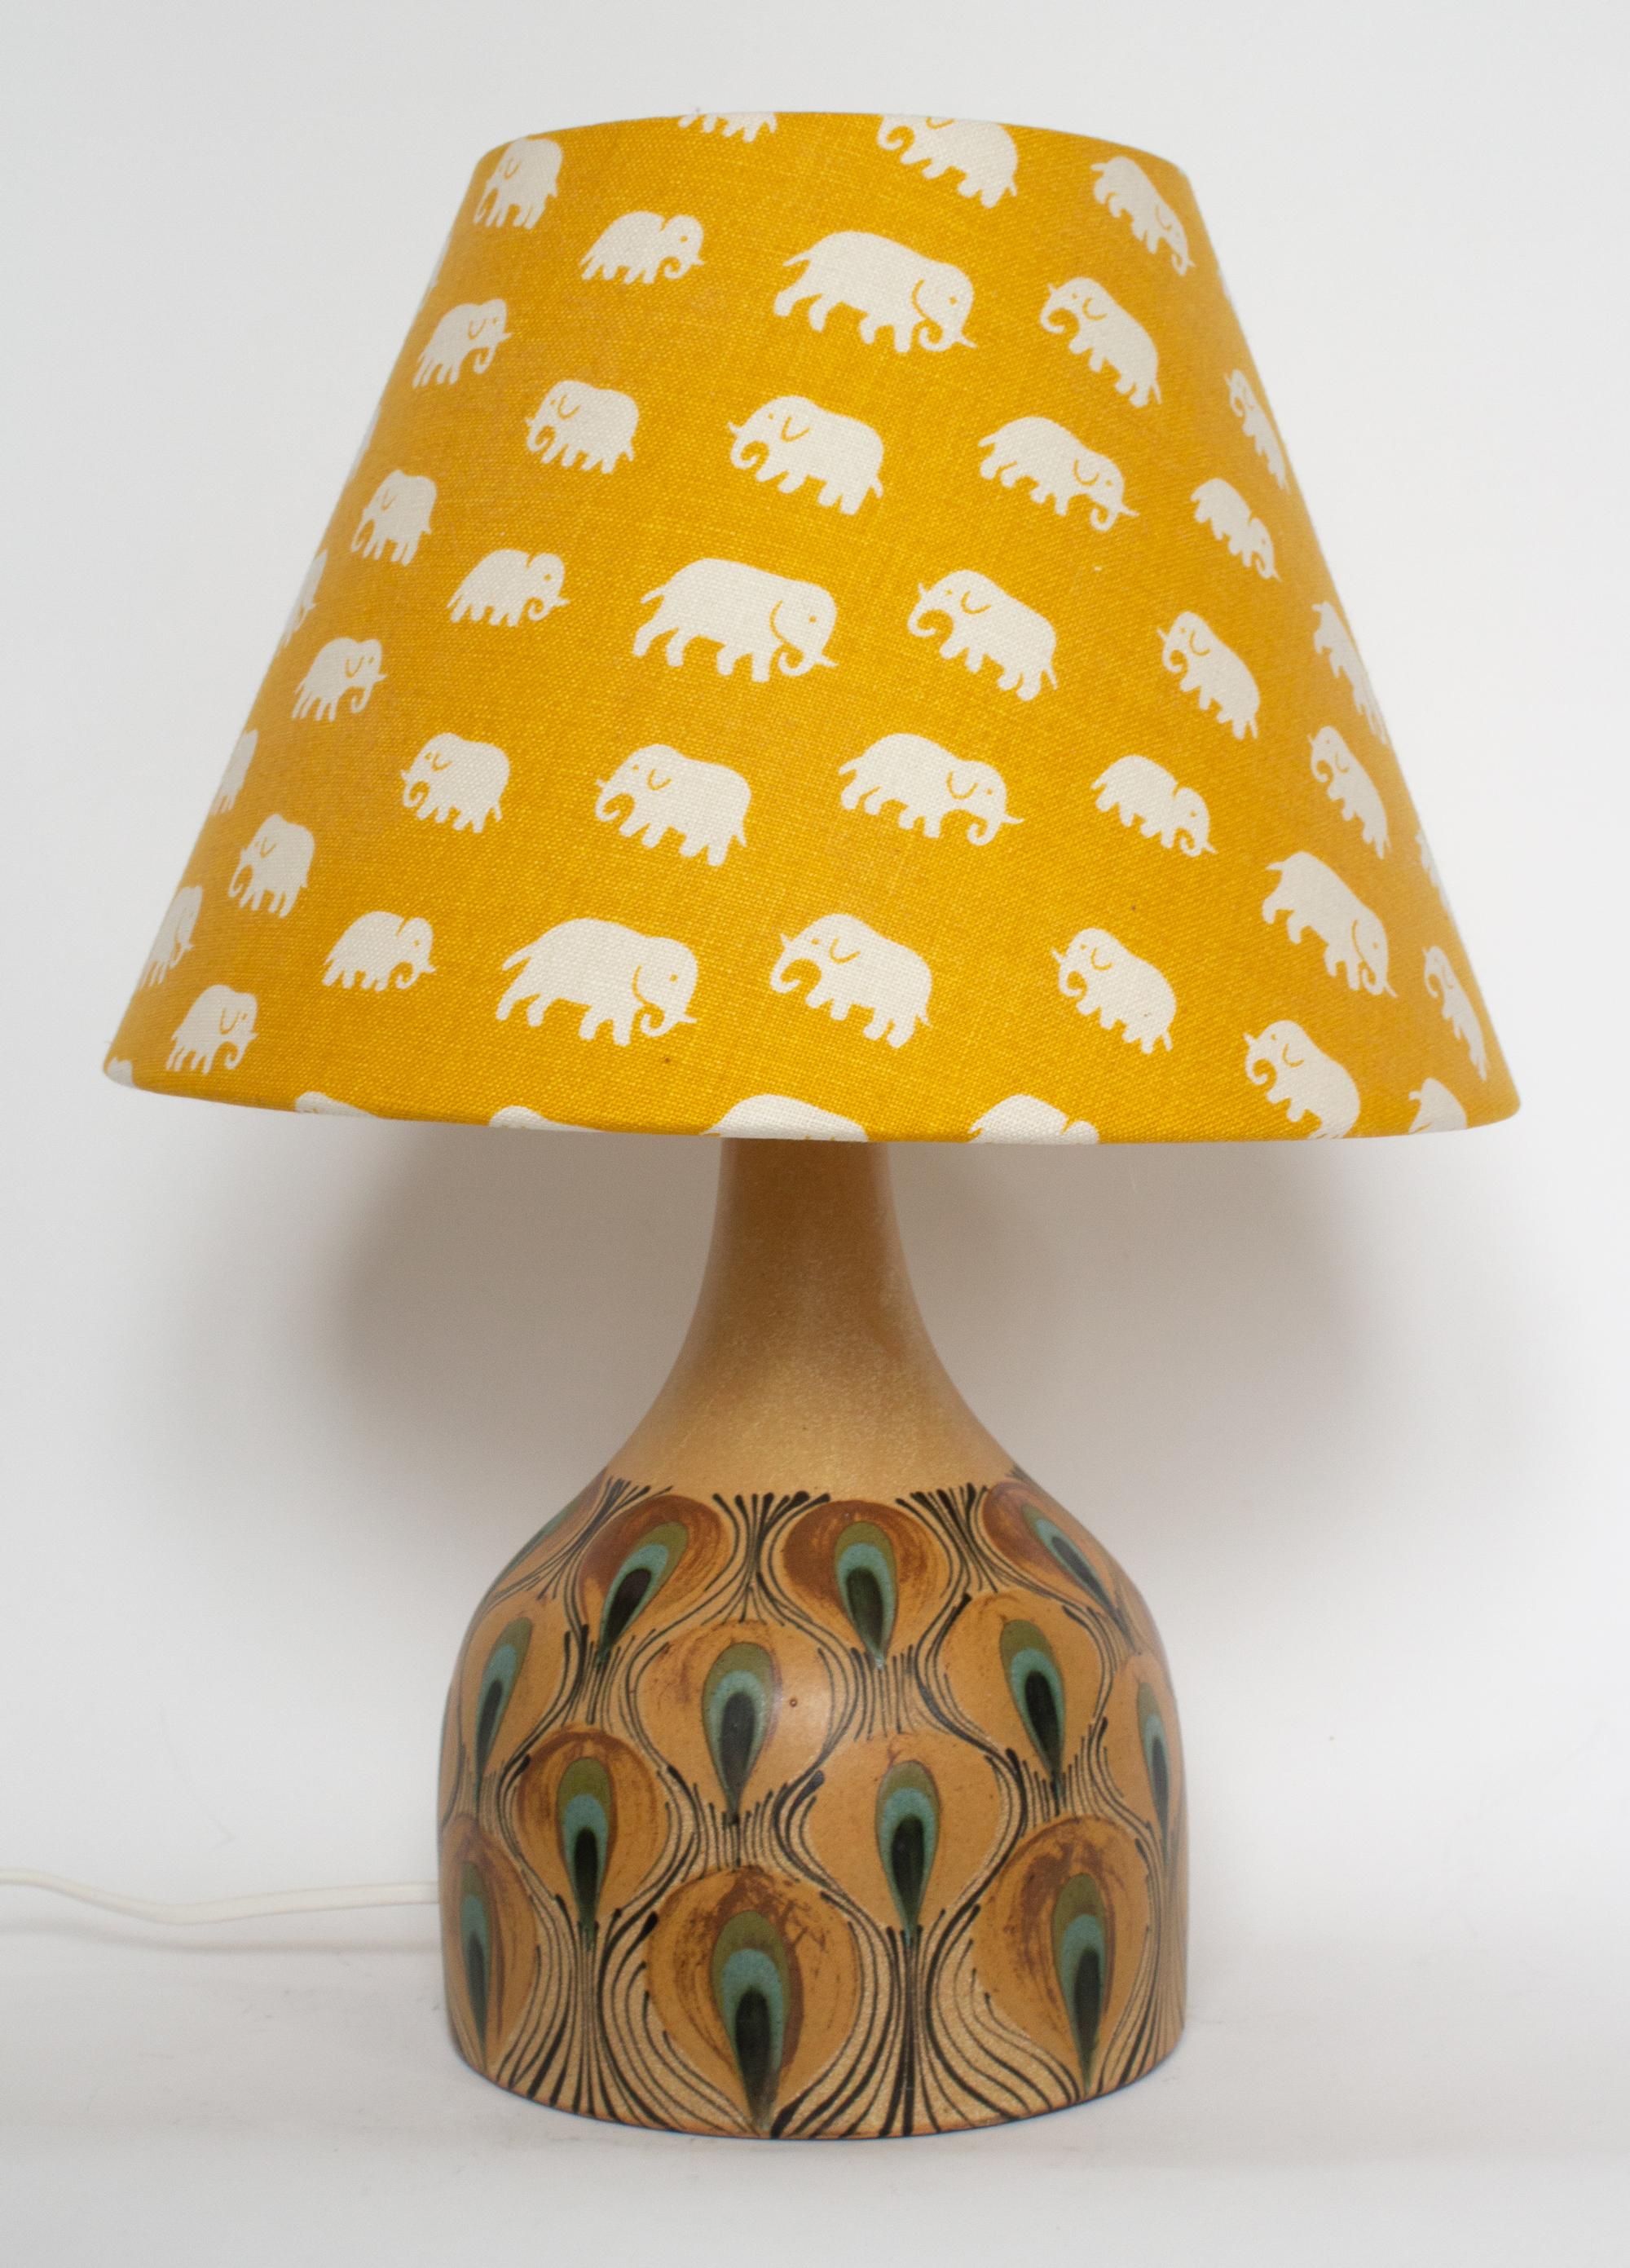 Mid-Century Modern Danish table lamp with peacock pattern by Dybdahl. Unconventional and charming ceramic table lamp, suitable for any interior with a Bloomsbury twist. Sells without the lampshade, so that you can add your own